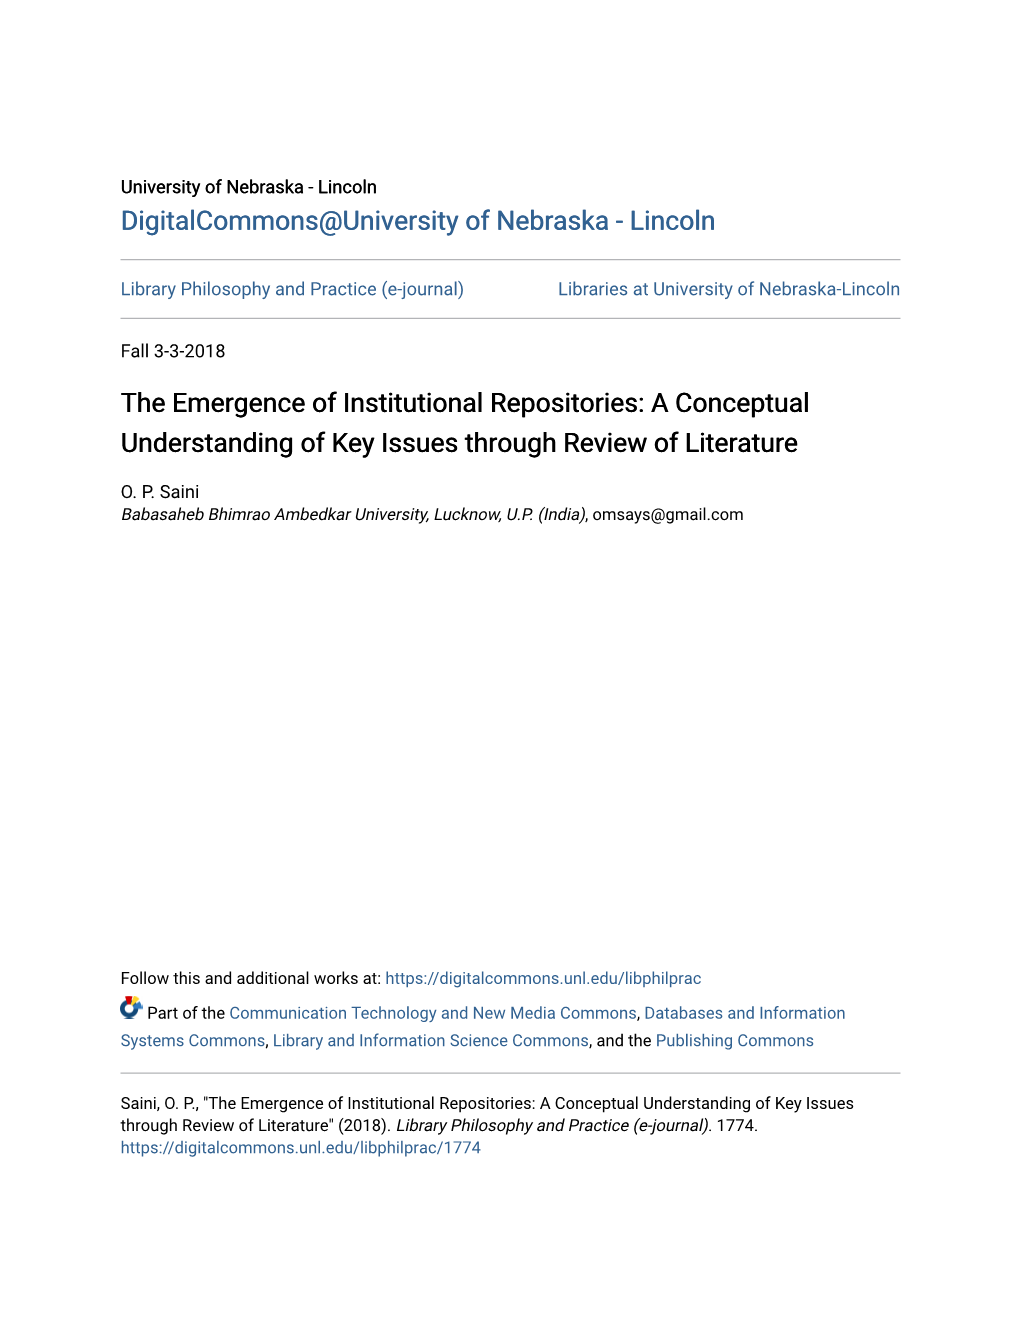 The Emergence of Institutional Repositories: a Conceptual Understanding of Key Issues Through Review of Literature